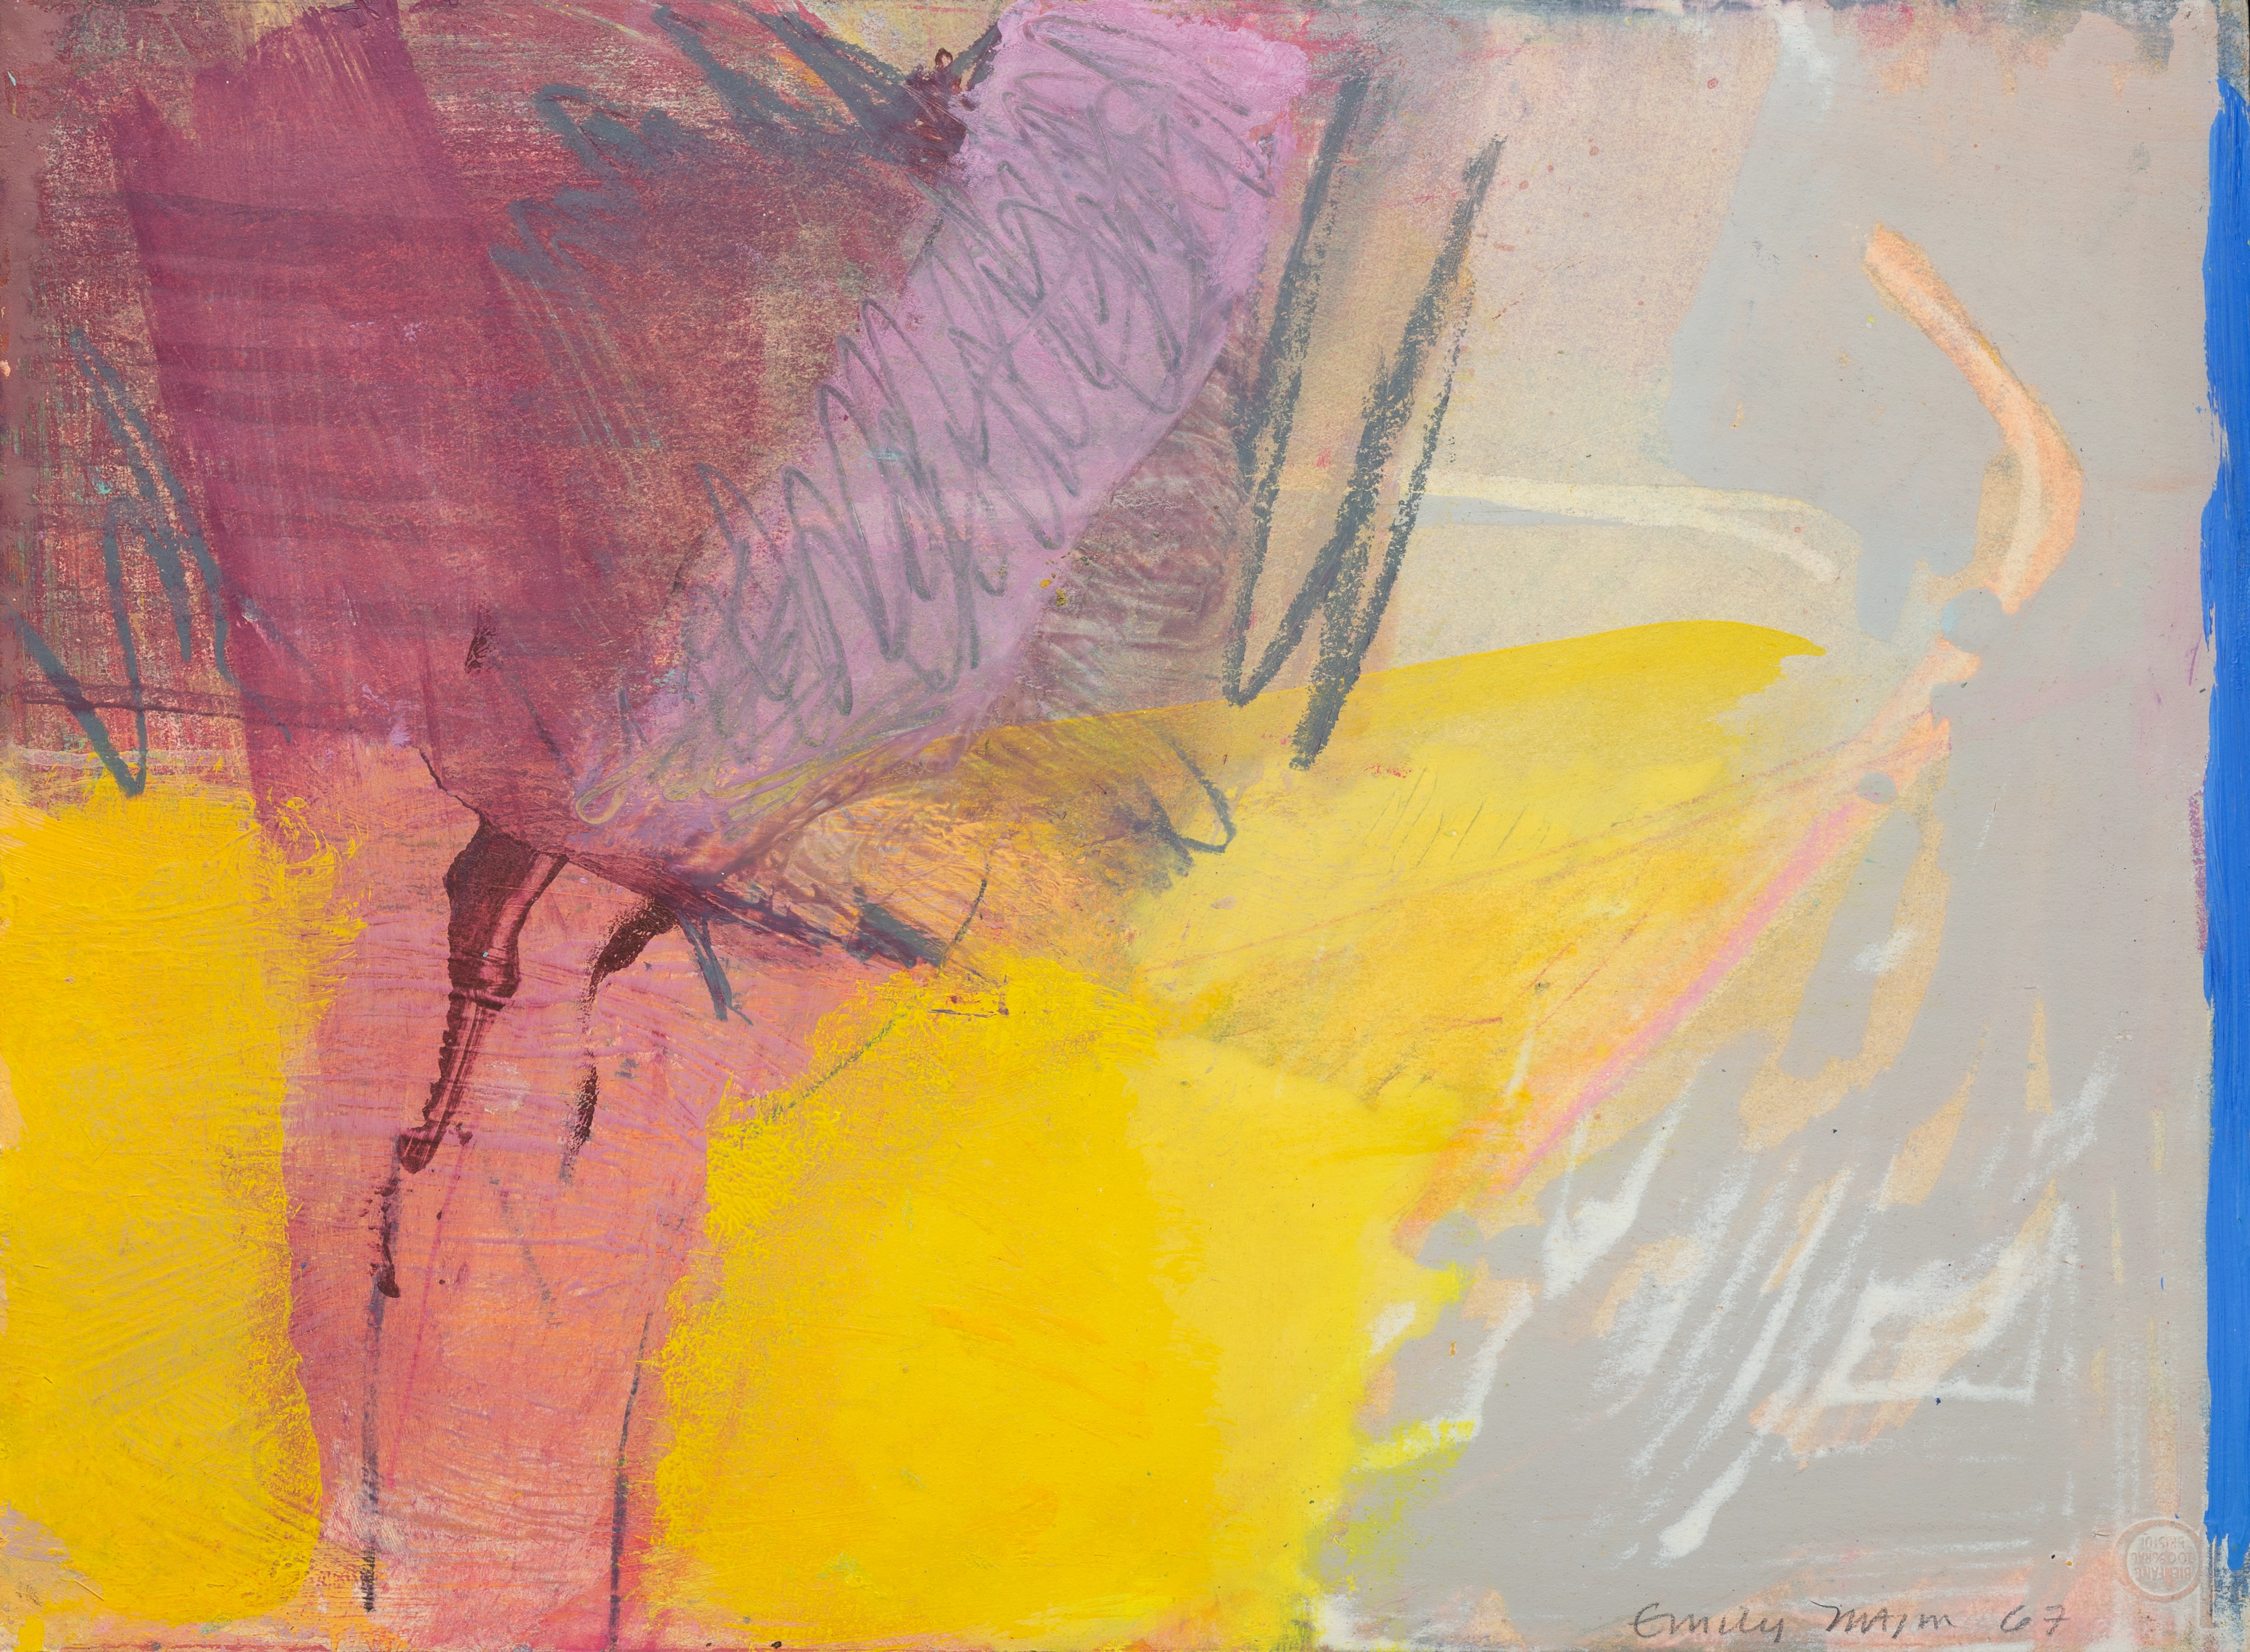 Abstract oil on paper with greys on the right and purples, yellow, and magenta on the left. Grey circular, gestural marks are layered on top of the colors in the upper left.